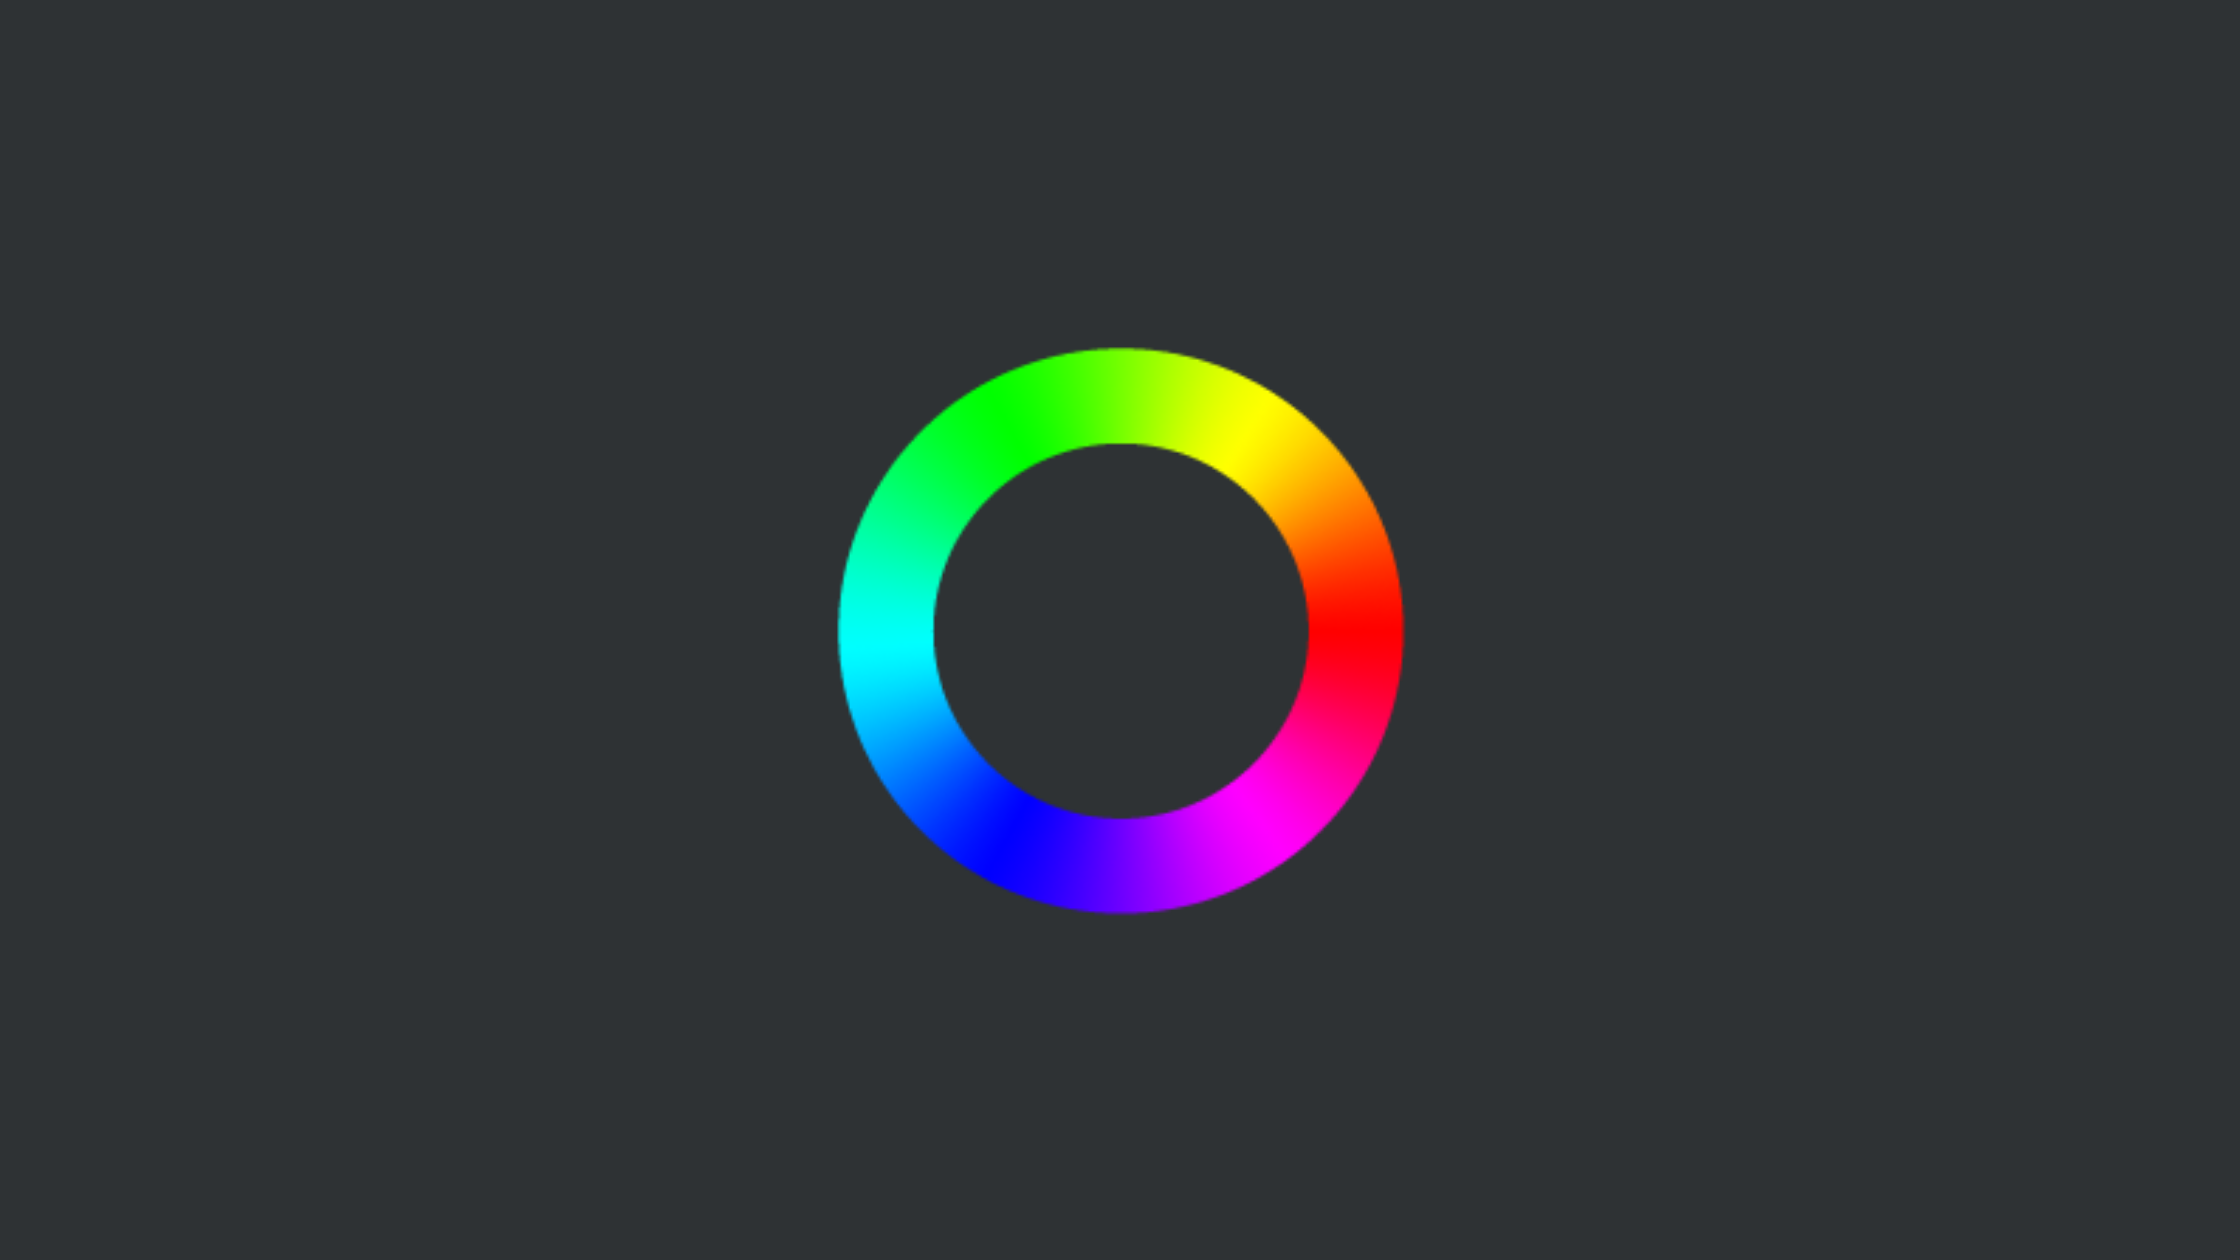 online color picker from image